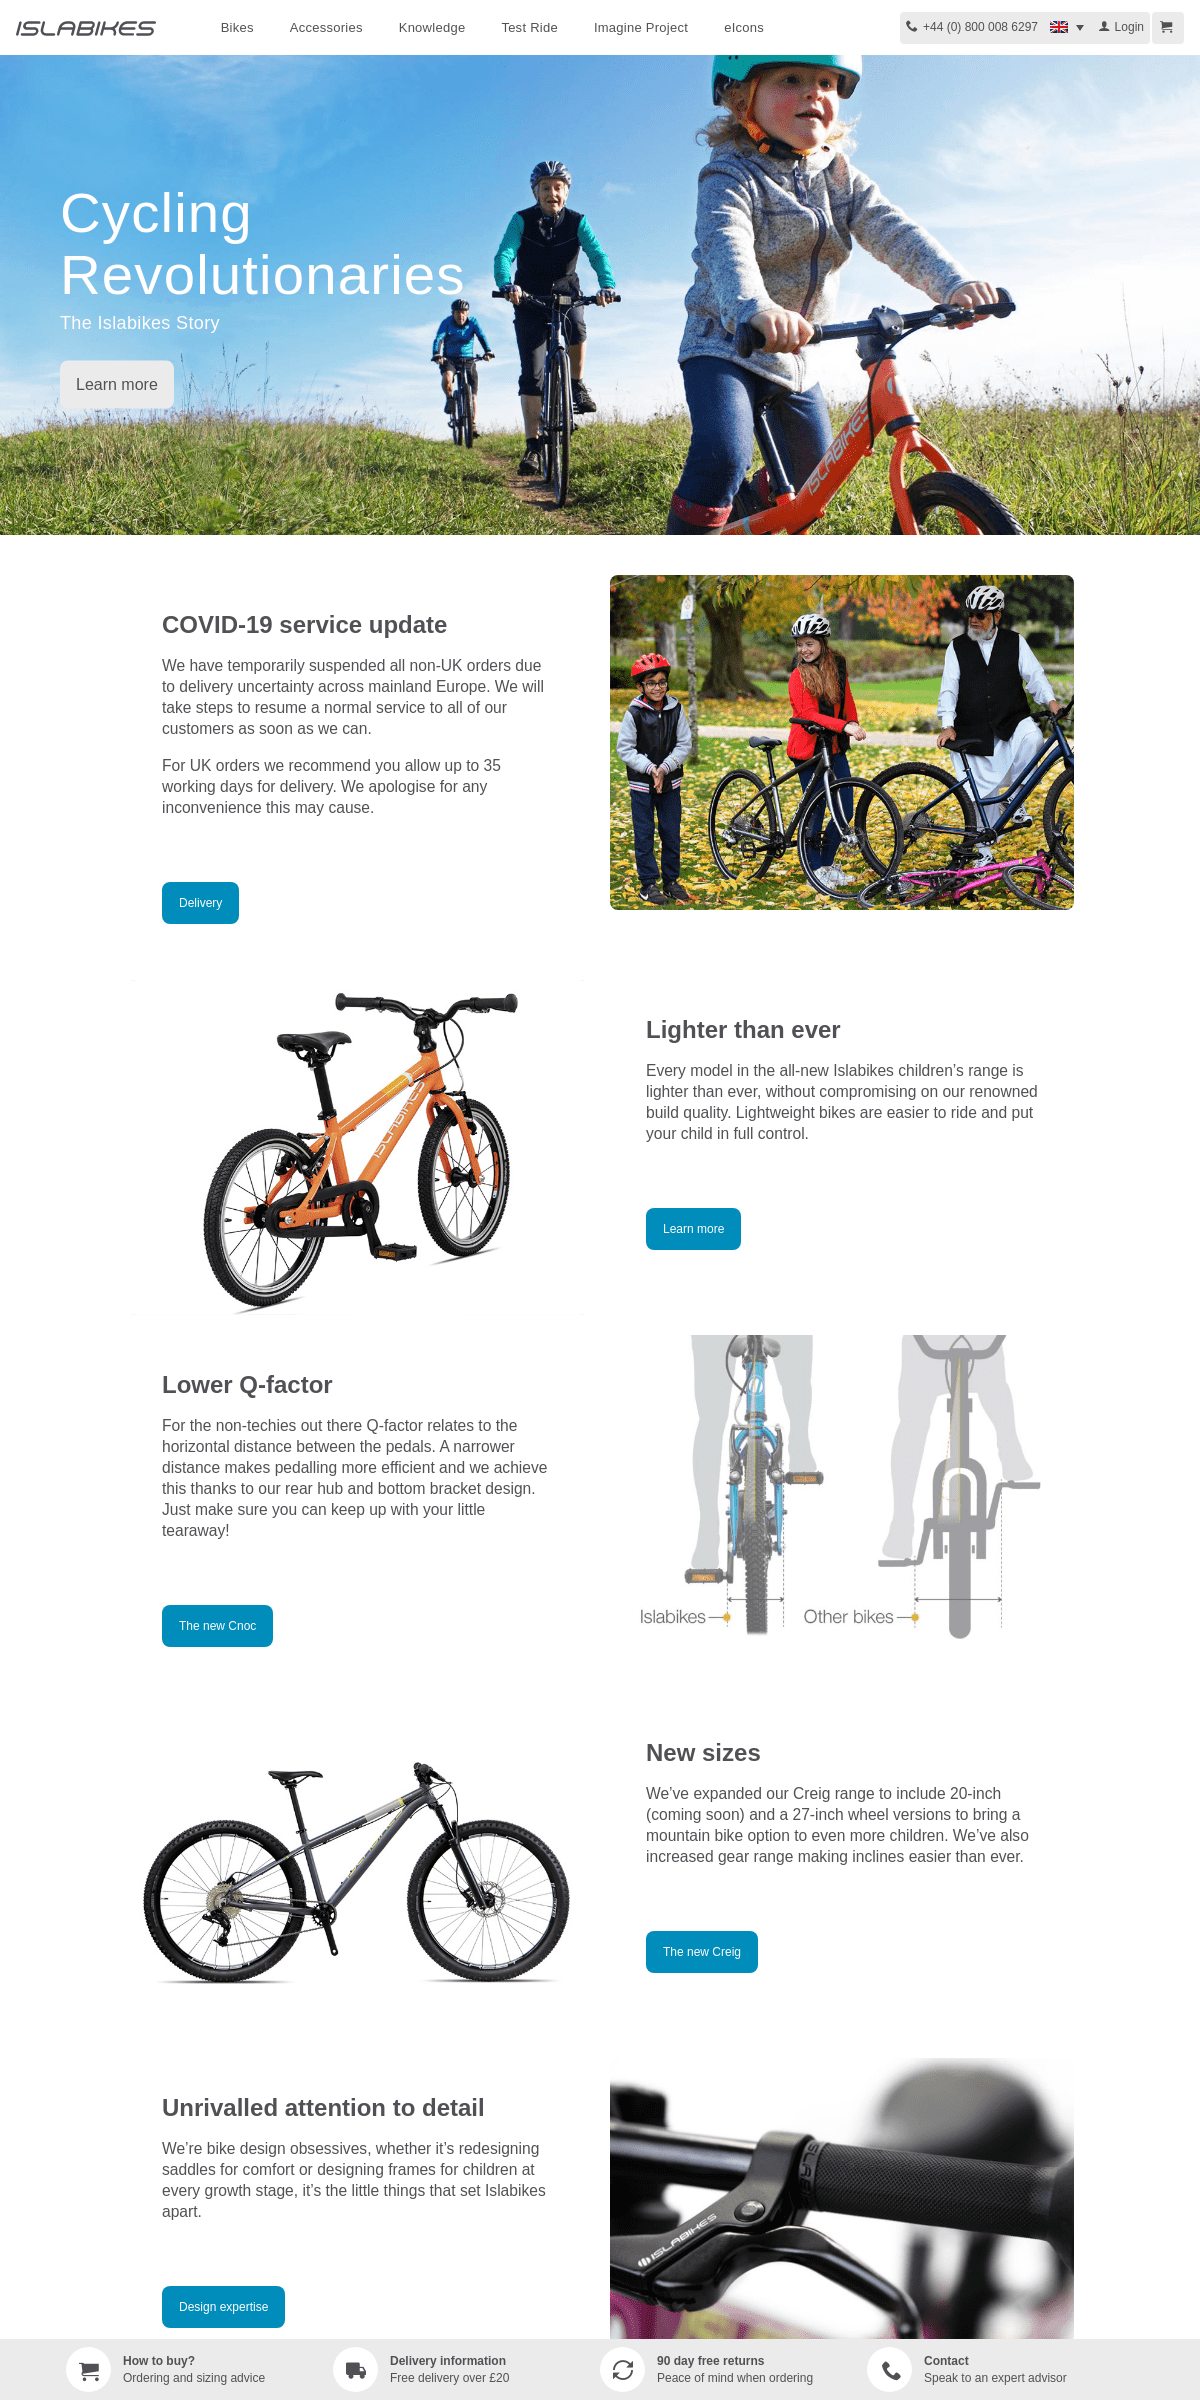 A complete backup of islabikes.co.uk